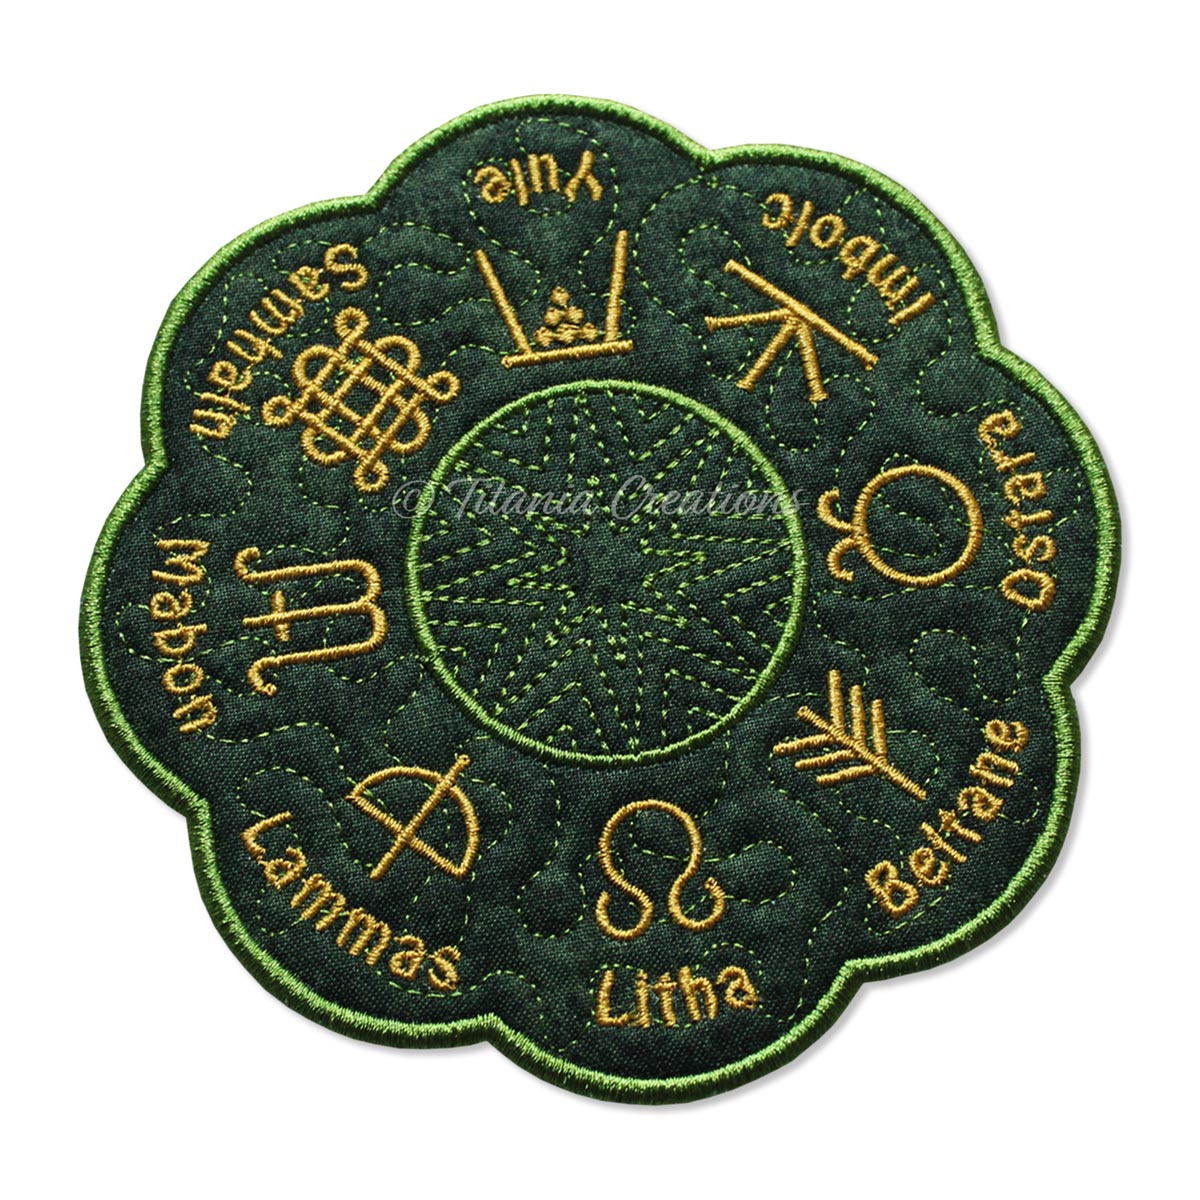 ITH Wheel of The Year Candle Mat 5x5 6x6 7x7 8x8